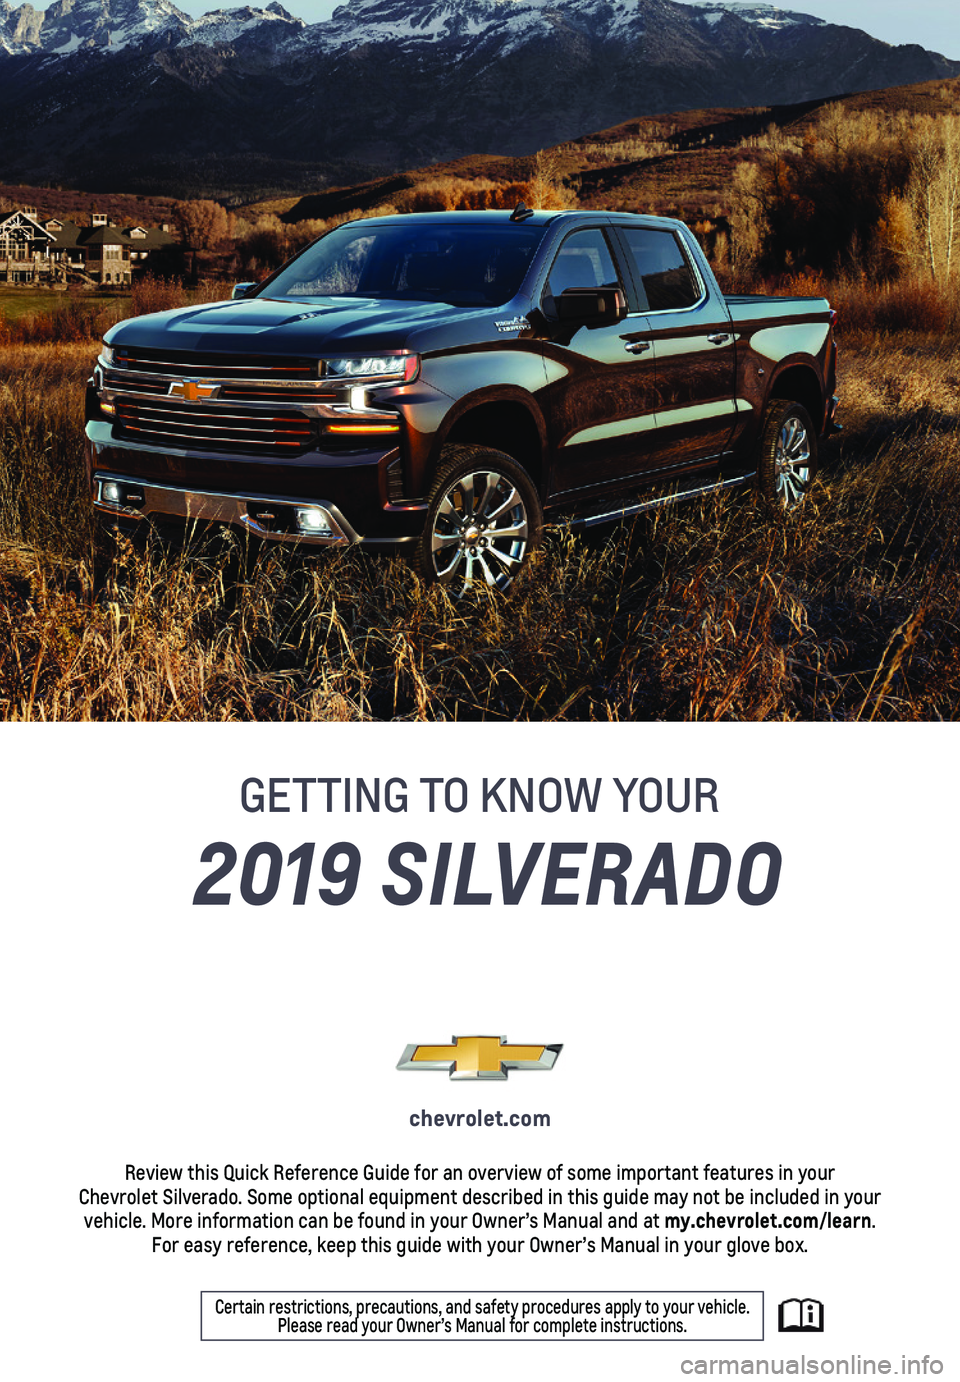 CHEVROLET SILVERADO 2019  Get To Know Guide 1
Certain restrictions, precautions, and safety procedures apply to your v\
ehicle.  Please read your Owner’s Manual for complete instructions.
2019 SILVERADO
chevrolet.com
Review this Quick Referen